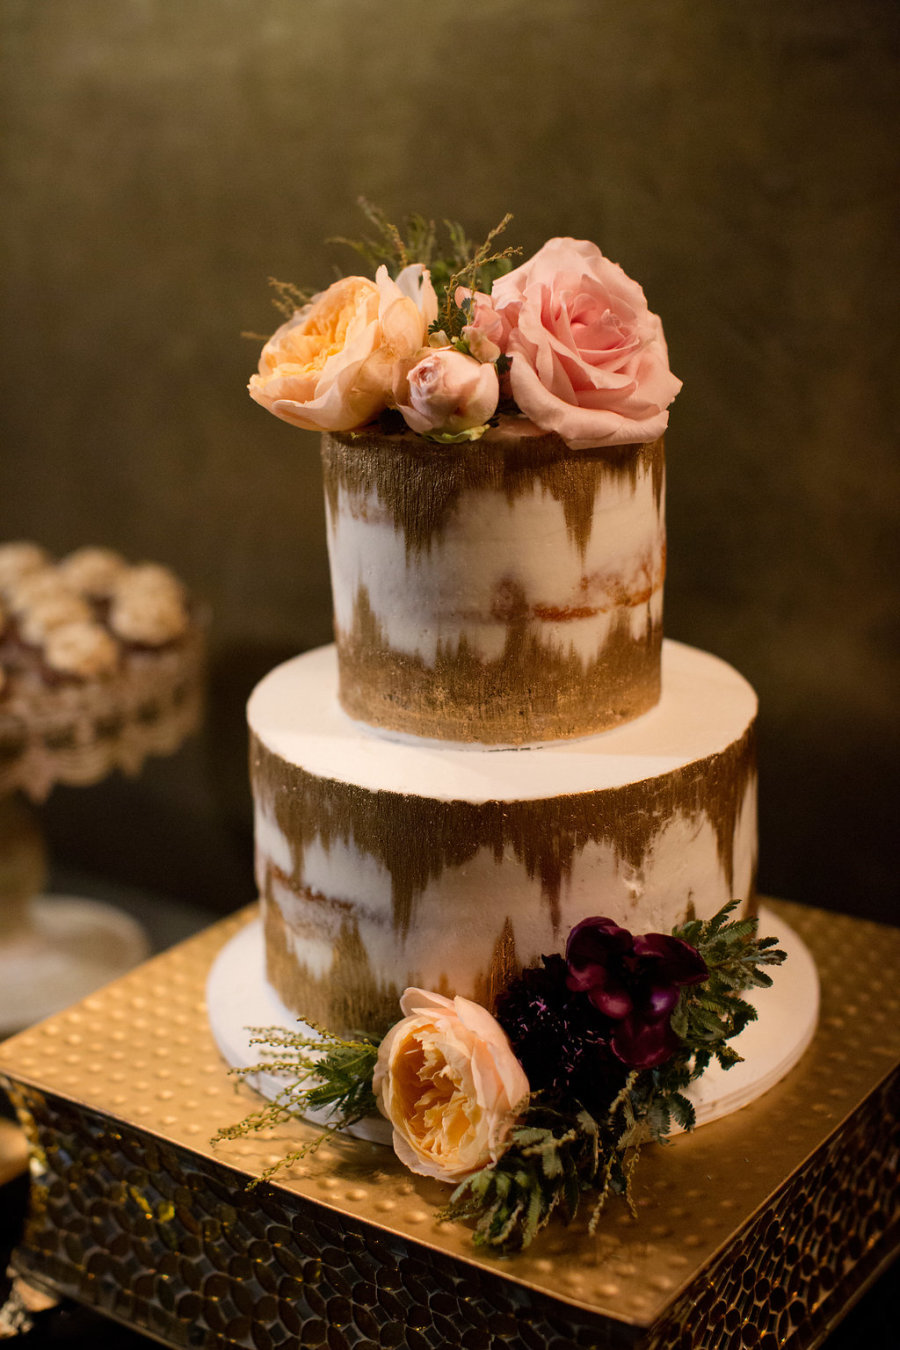 The wedding cake was ikat, with gold and white touches and fresh blooms